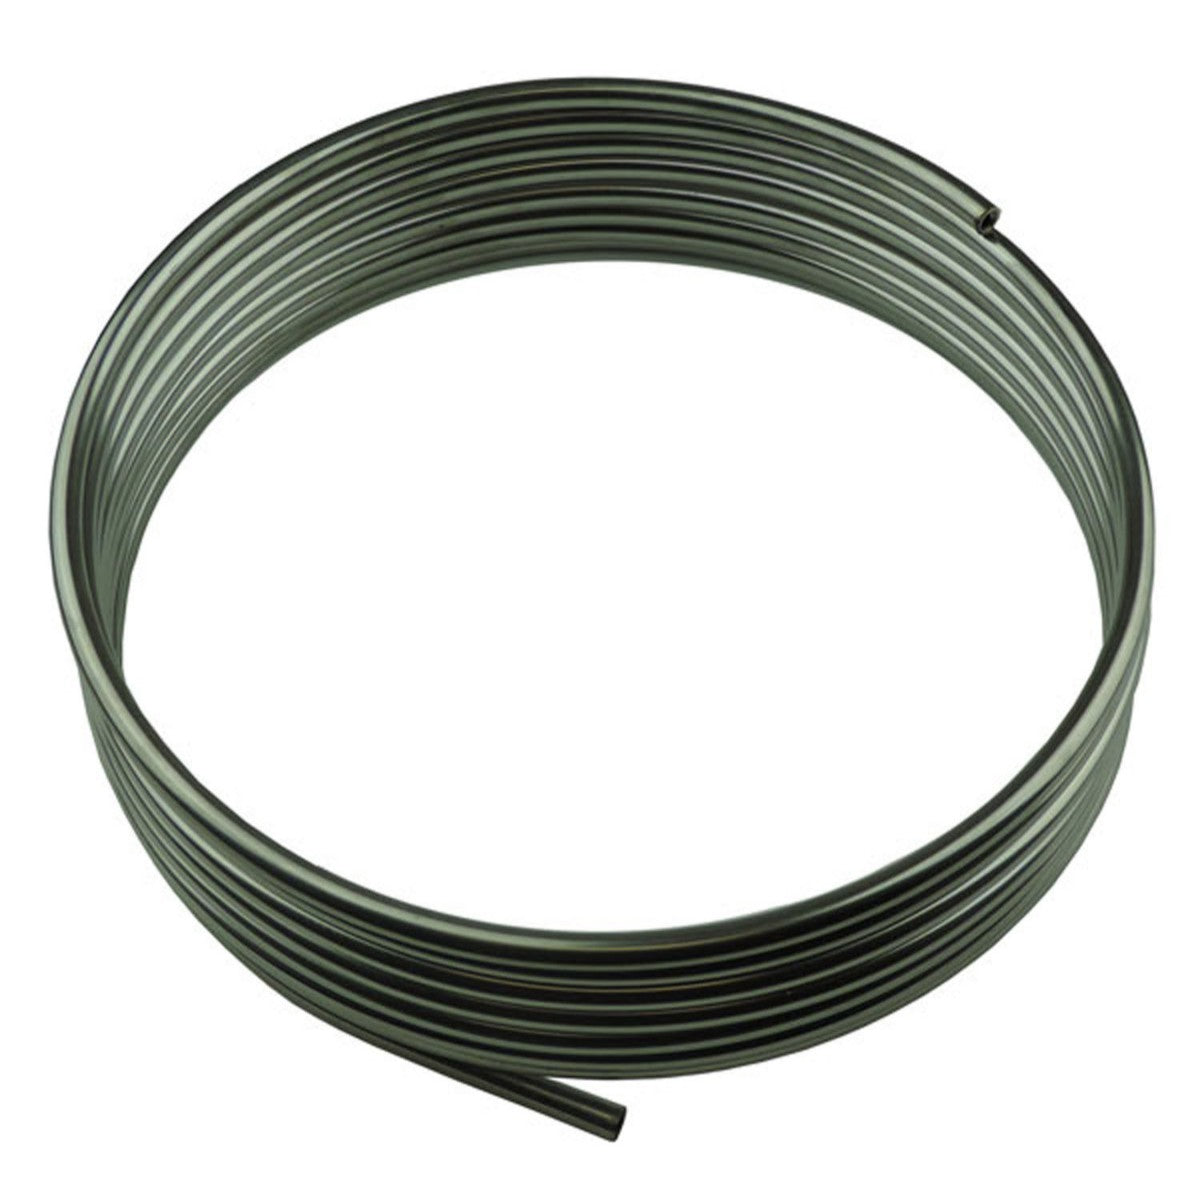 4 AN Braided Stainless Steel Hose Line [20 ft. Length]